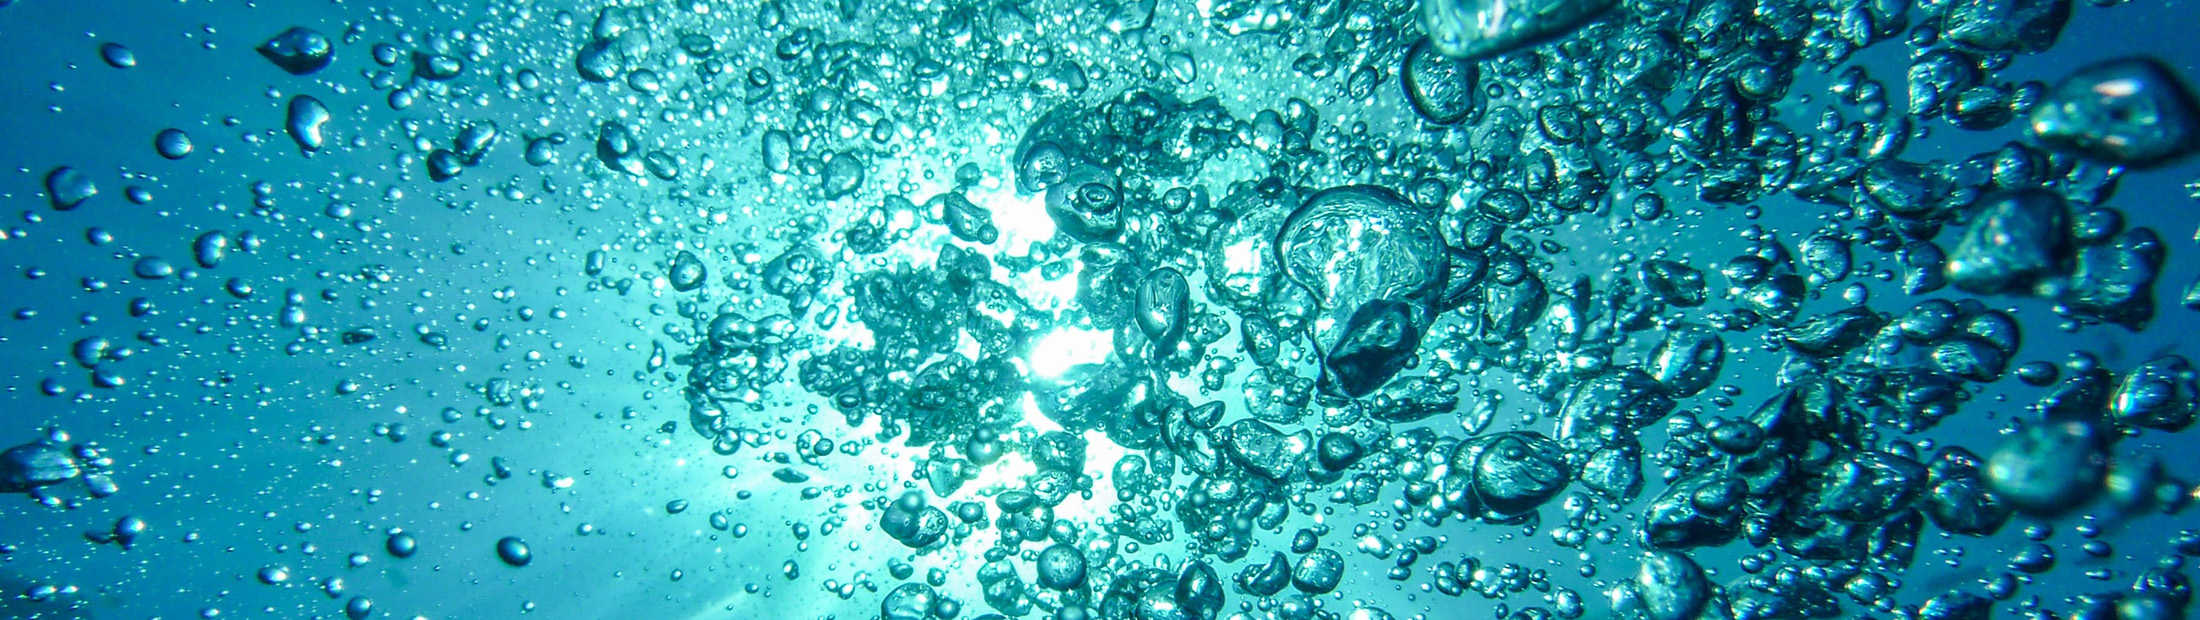 Bubbles Featured Image